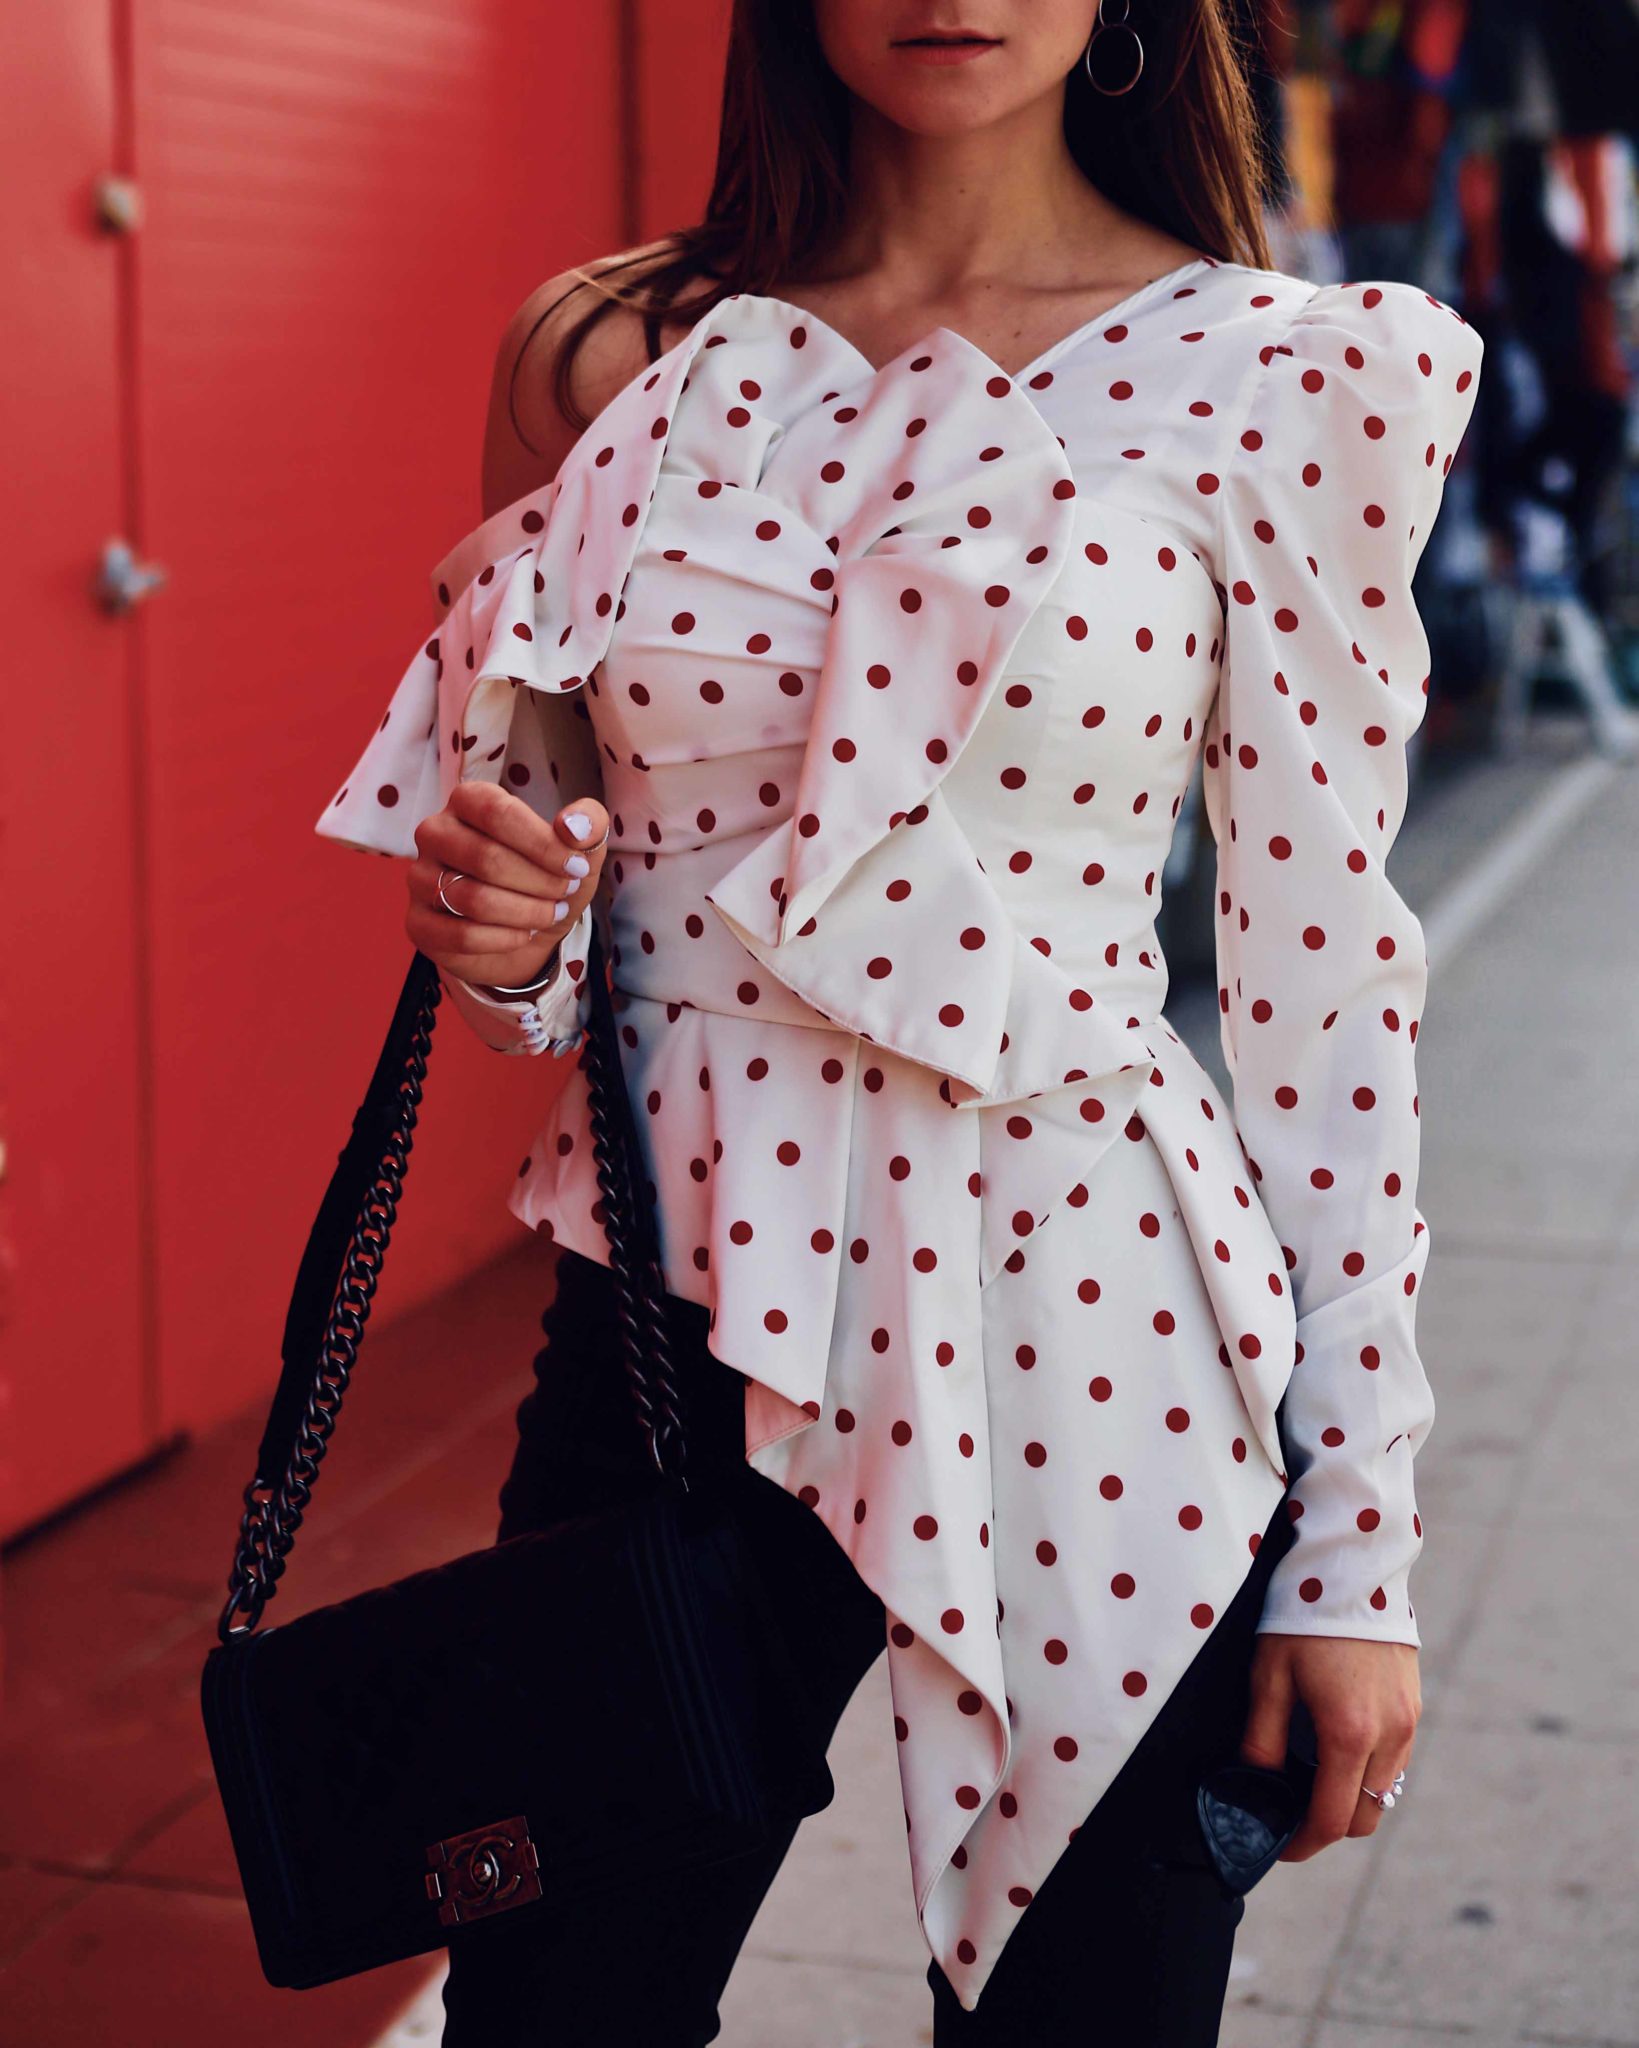 Evening tops: Statement blouse by Self Portrait via If Chic - More about this polka dots blouse on Houseofcomil.com